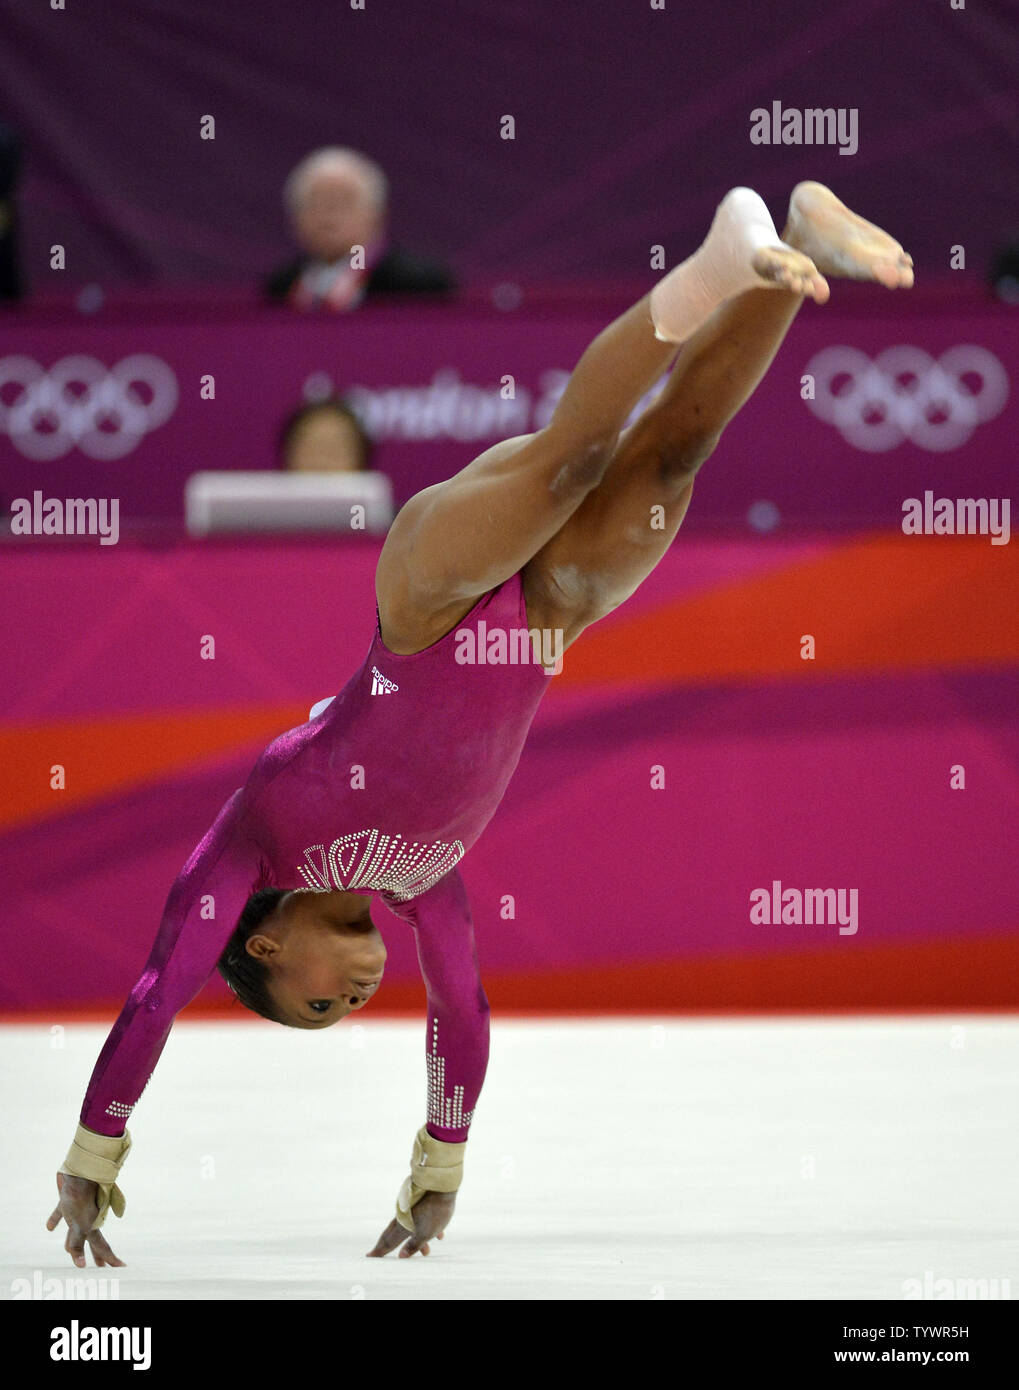 American Gymnast Gabrielle Douglas Goes Through Her Routine On The